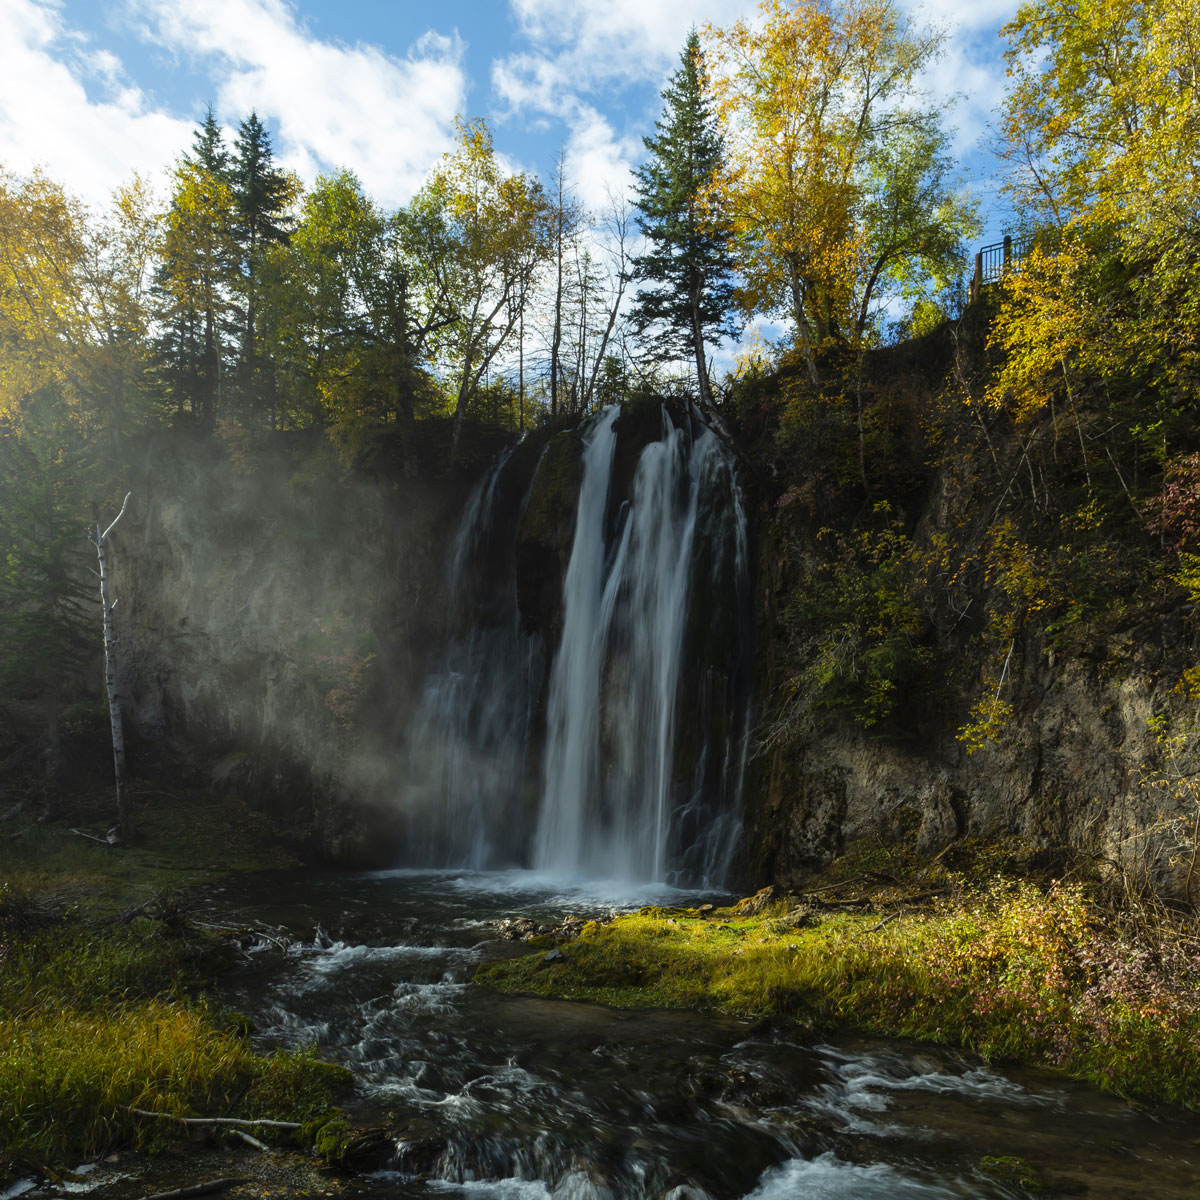 The waters of Spearfish Falls spill into the pools below with a silvery mist lit by an early morning sun.